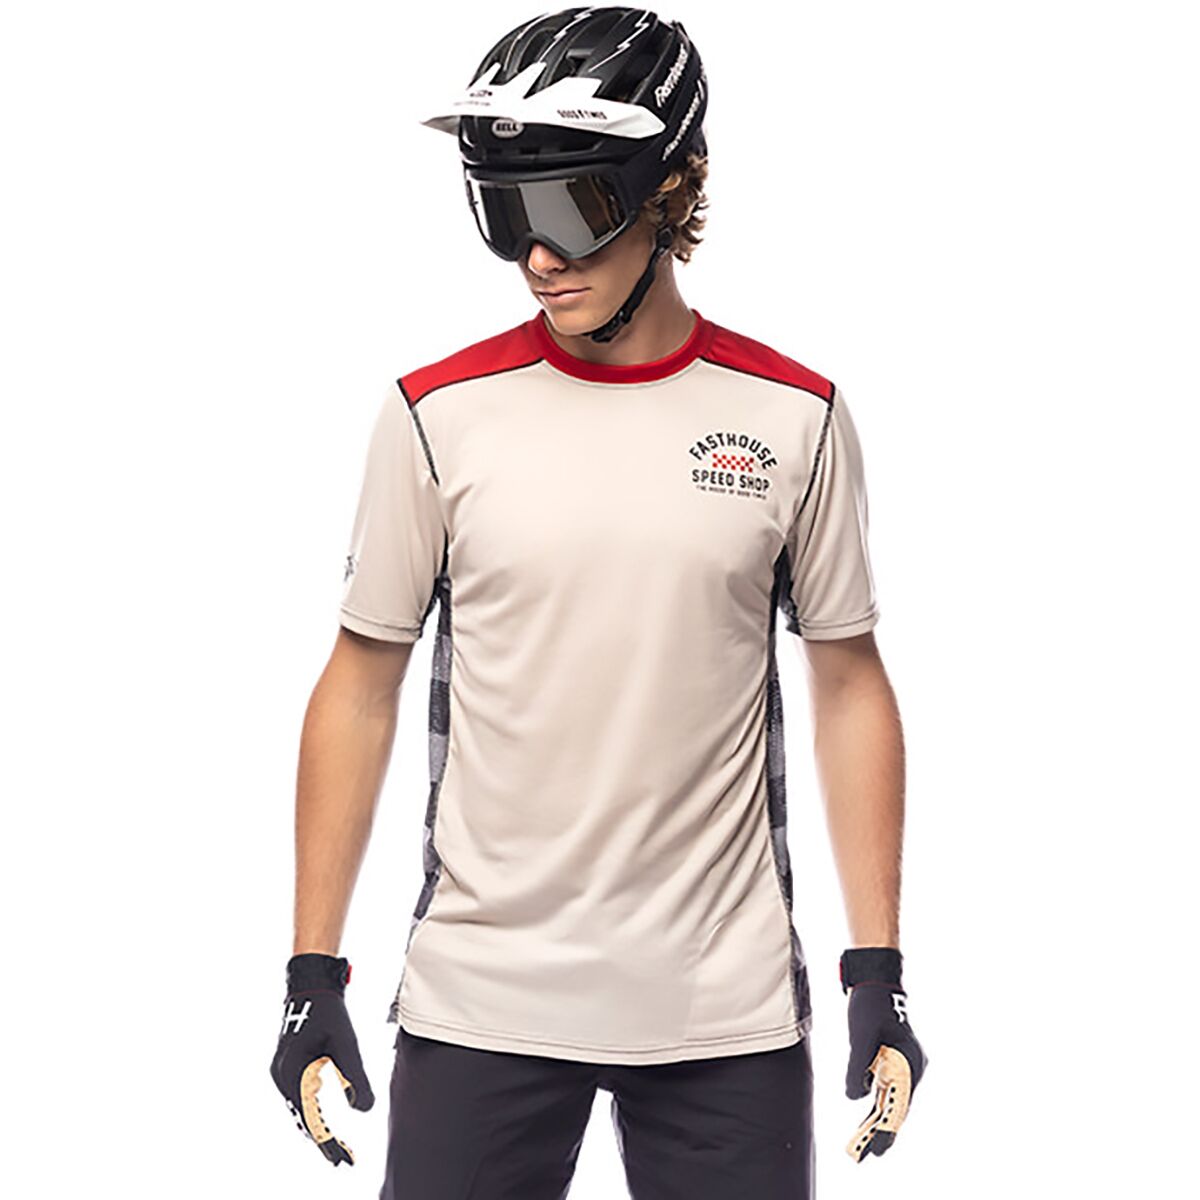 Fasthouse Classic Outland Short-Sleeve Jersey - Men's